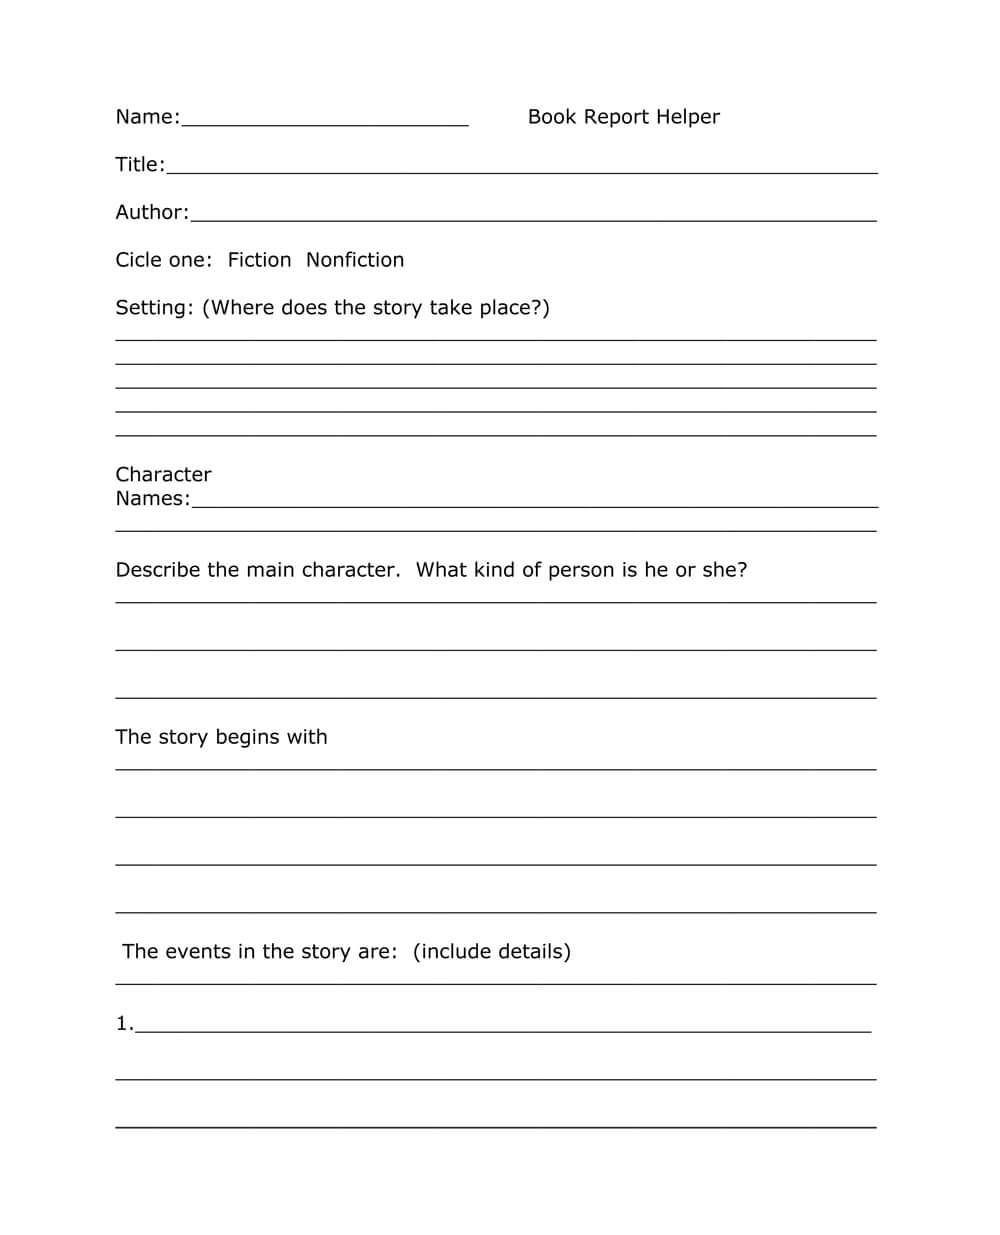 Book Report Templates From Custom Writing Service With One Page Book Report Template